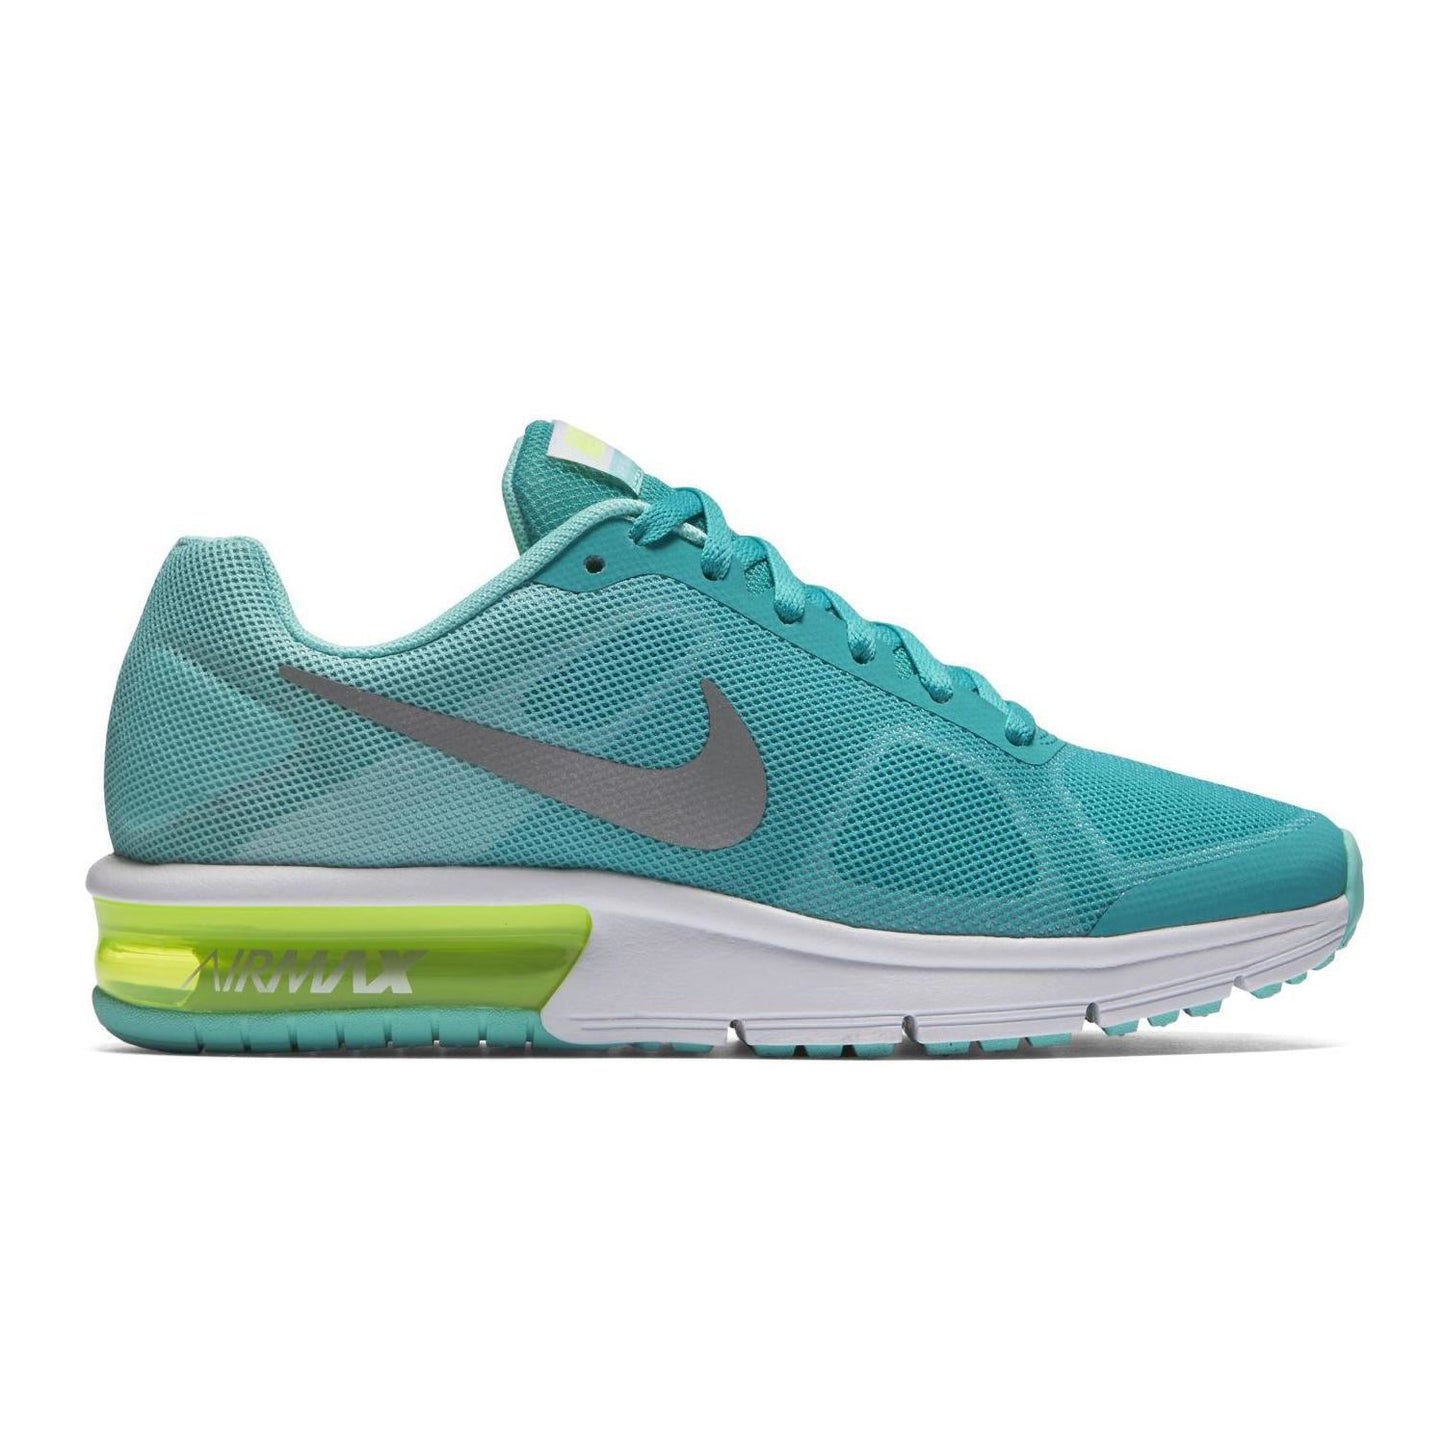 NIKE AIR MAX SEQUENT /GIRLS GREEN 724984 300